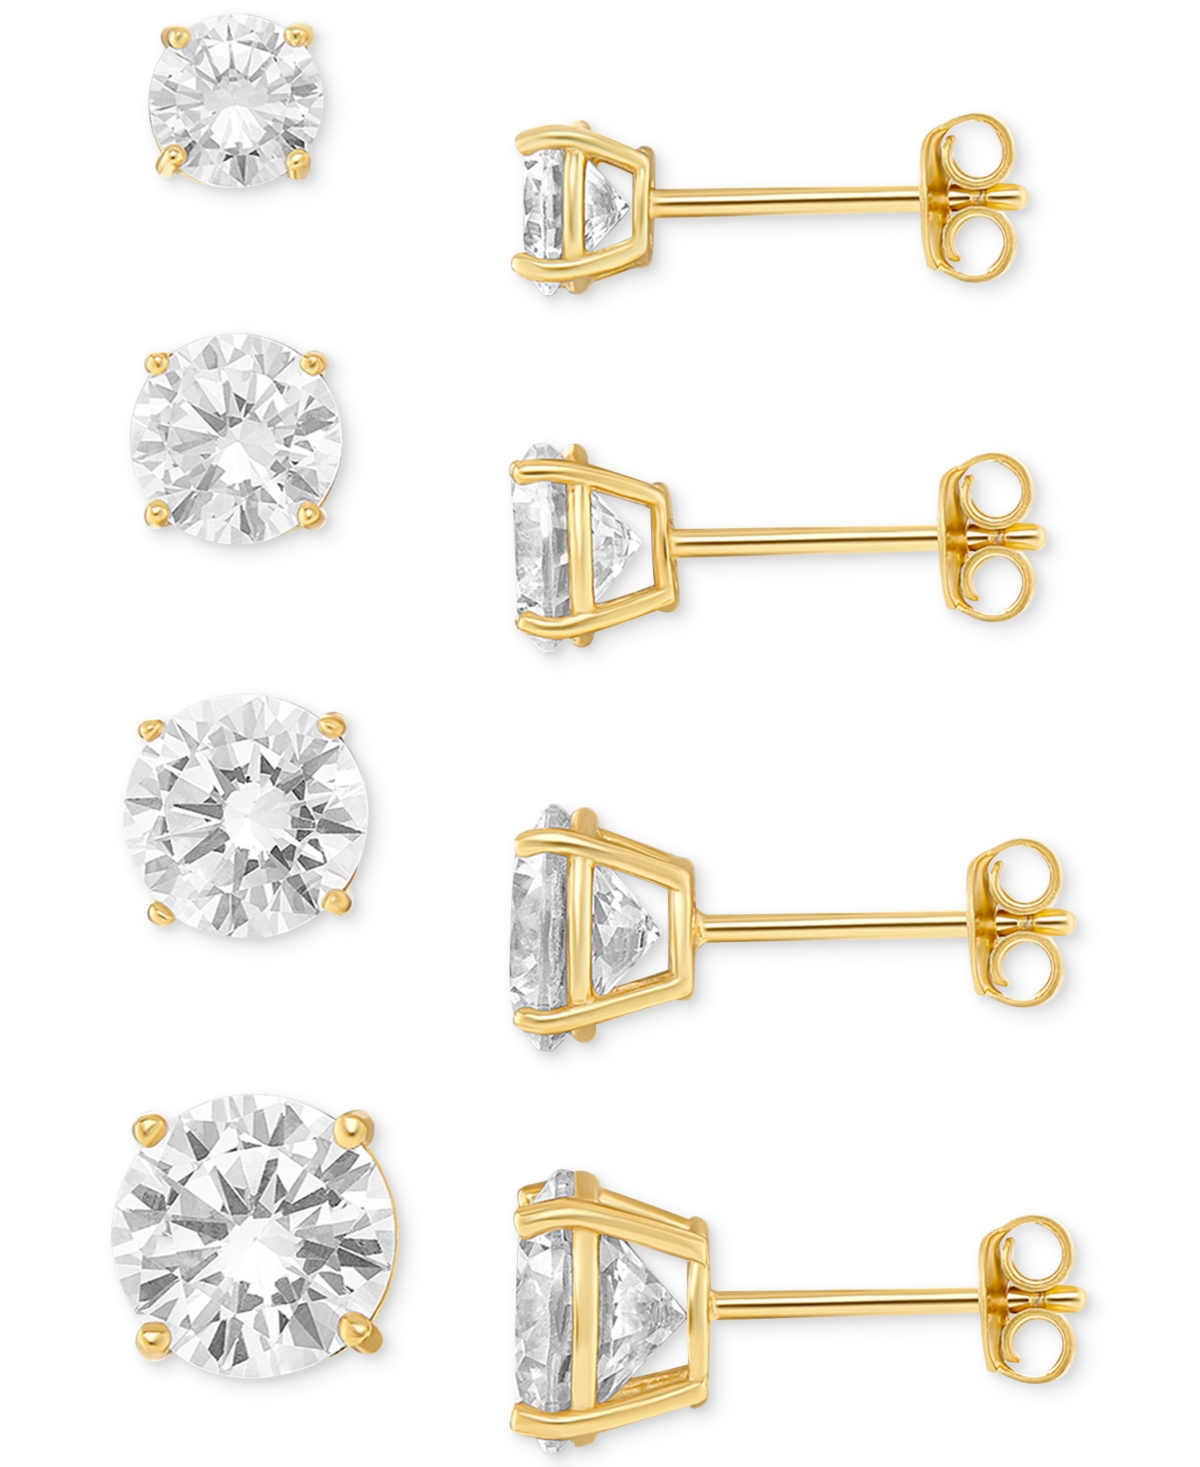 Giani Bernini 4-pc. Set Cubic Zirconia Graduated Solitaire Stud Earrings In 18k Gold-plated Sterling Silver, Creat